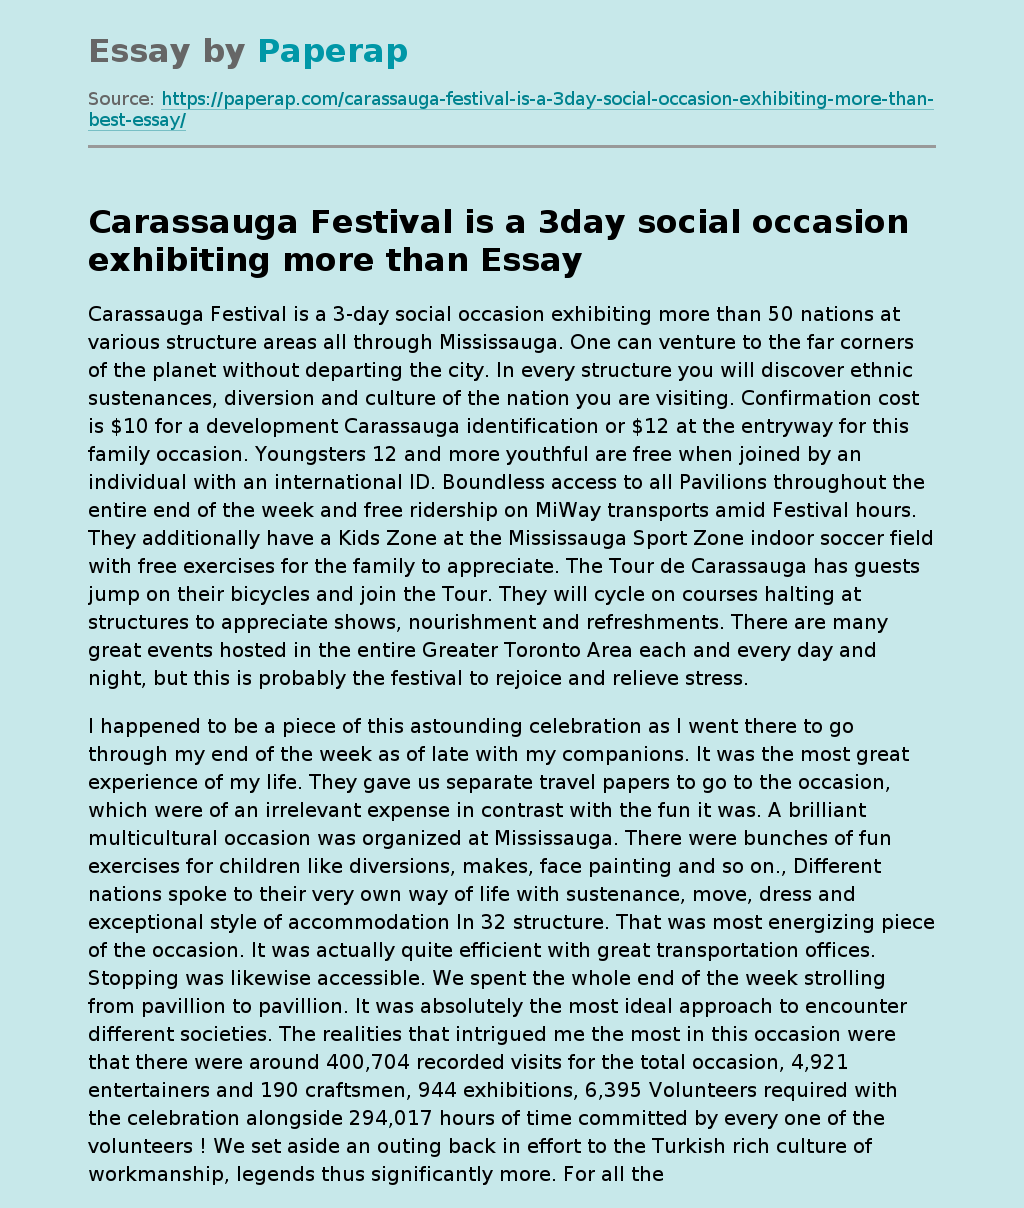 Carassauga Festival is a 3day social occasion exhibiting more than